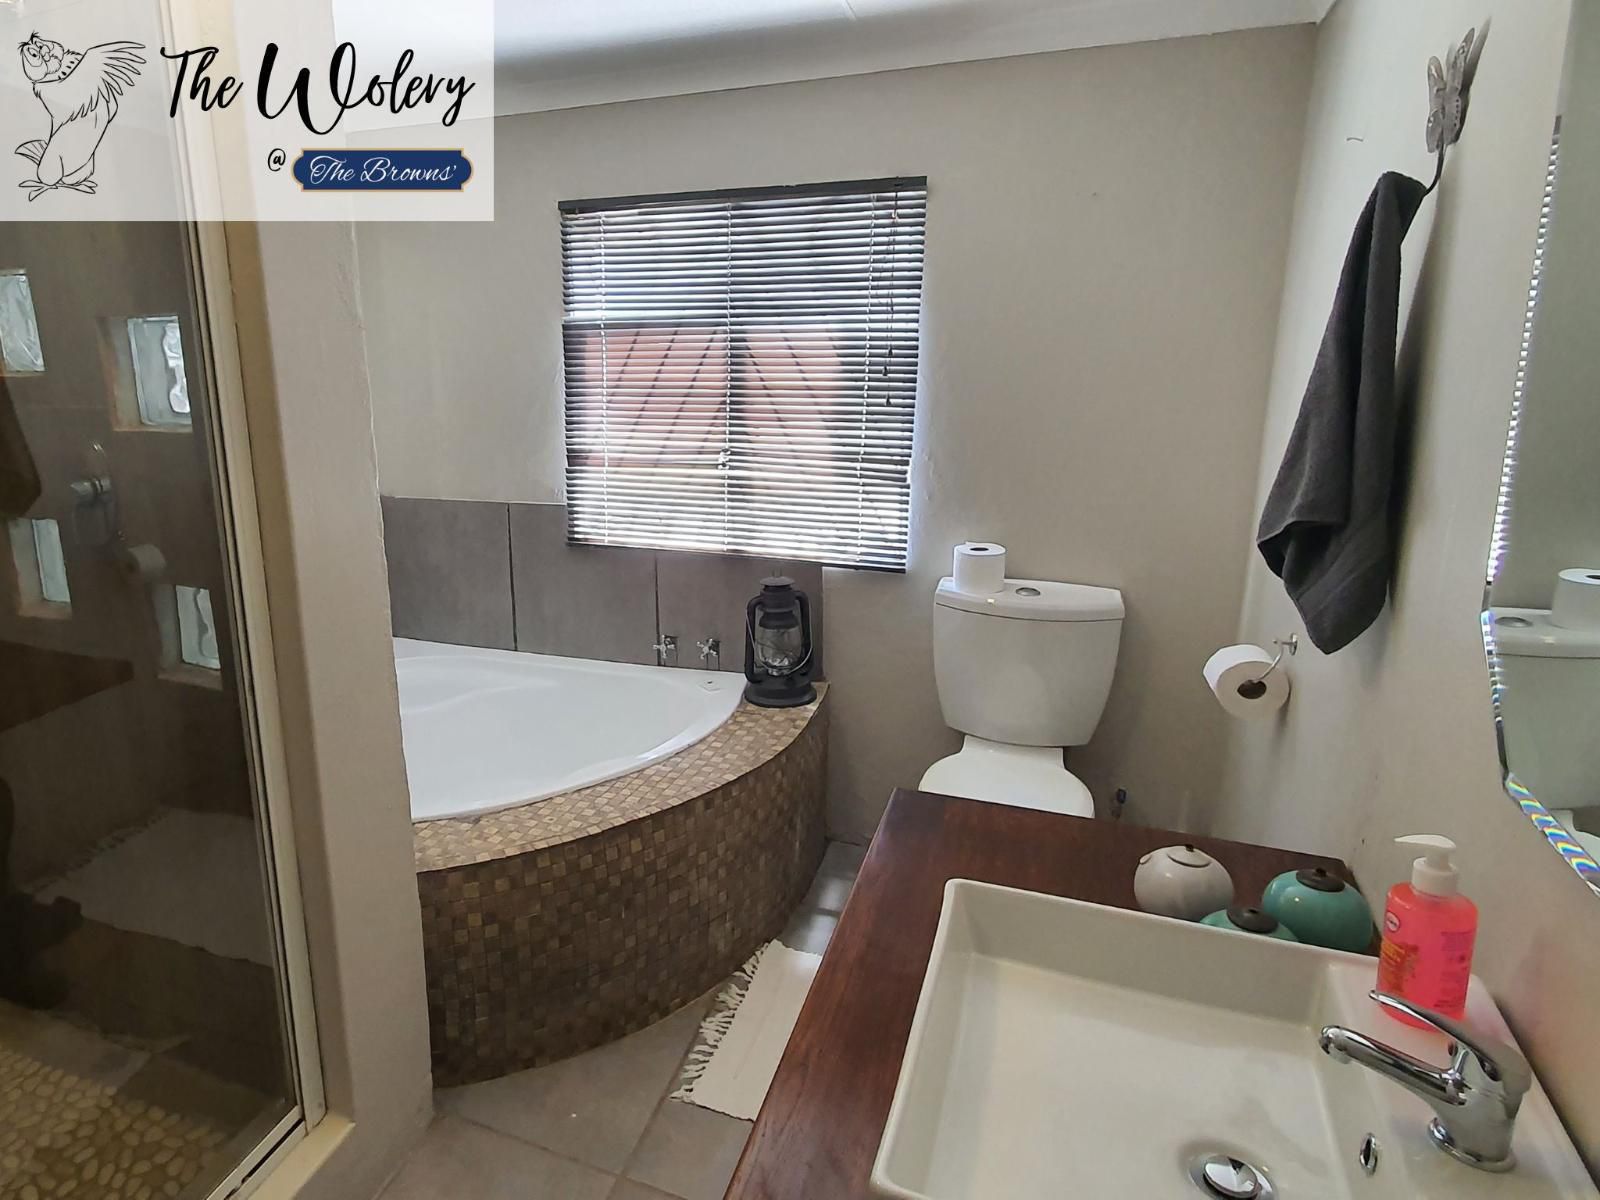 The Browns Luxury Guest Suites Dullstroom Mpumalanga South Africa Bathroom